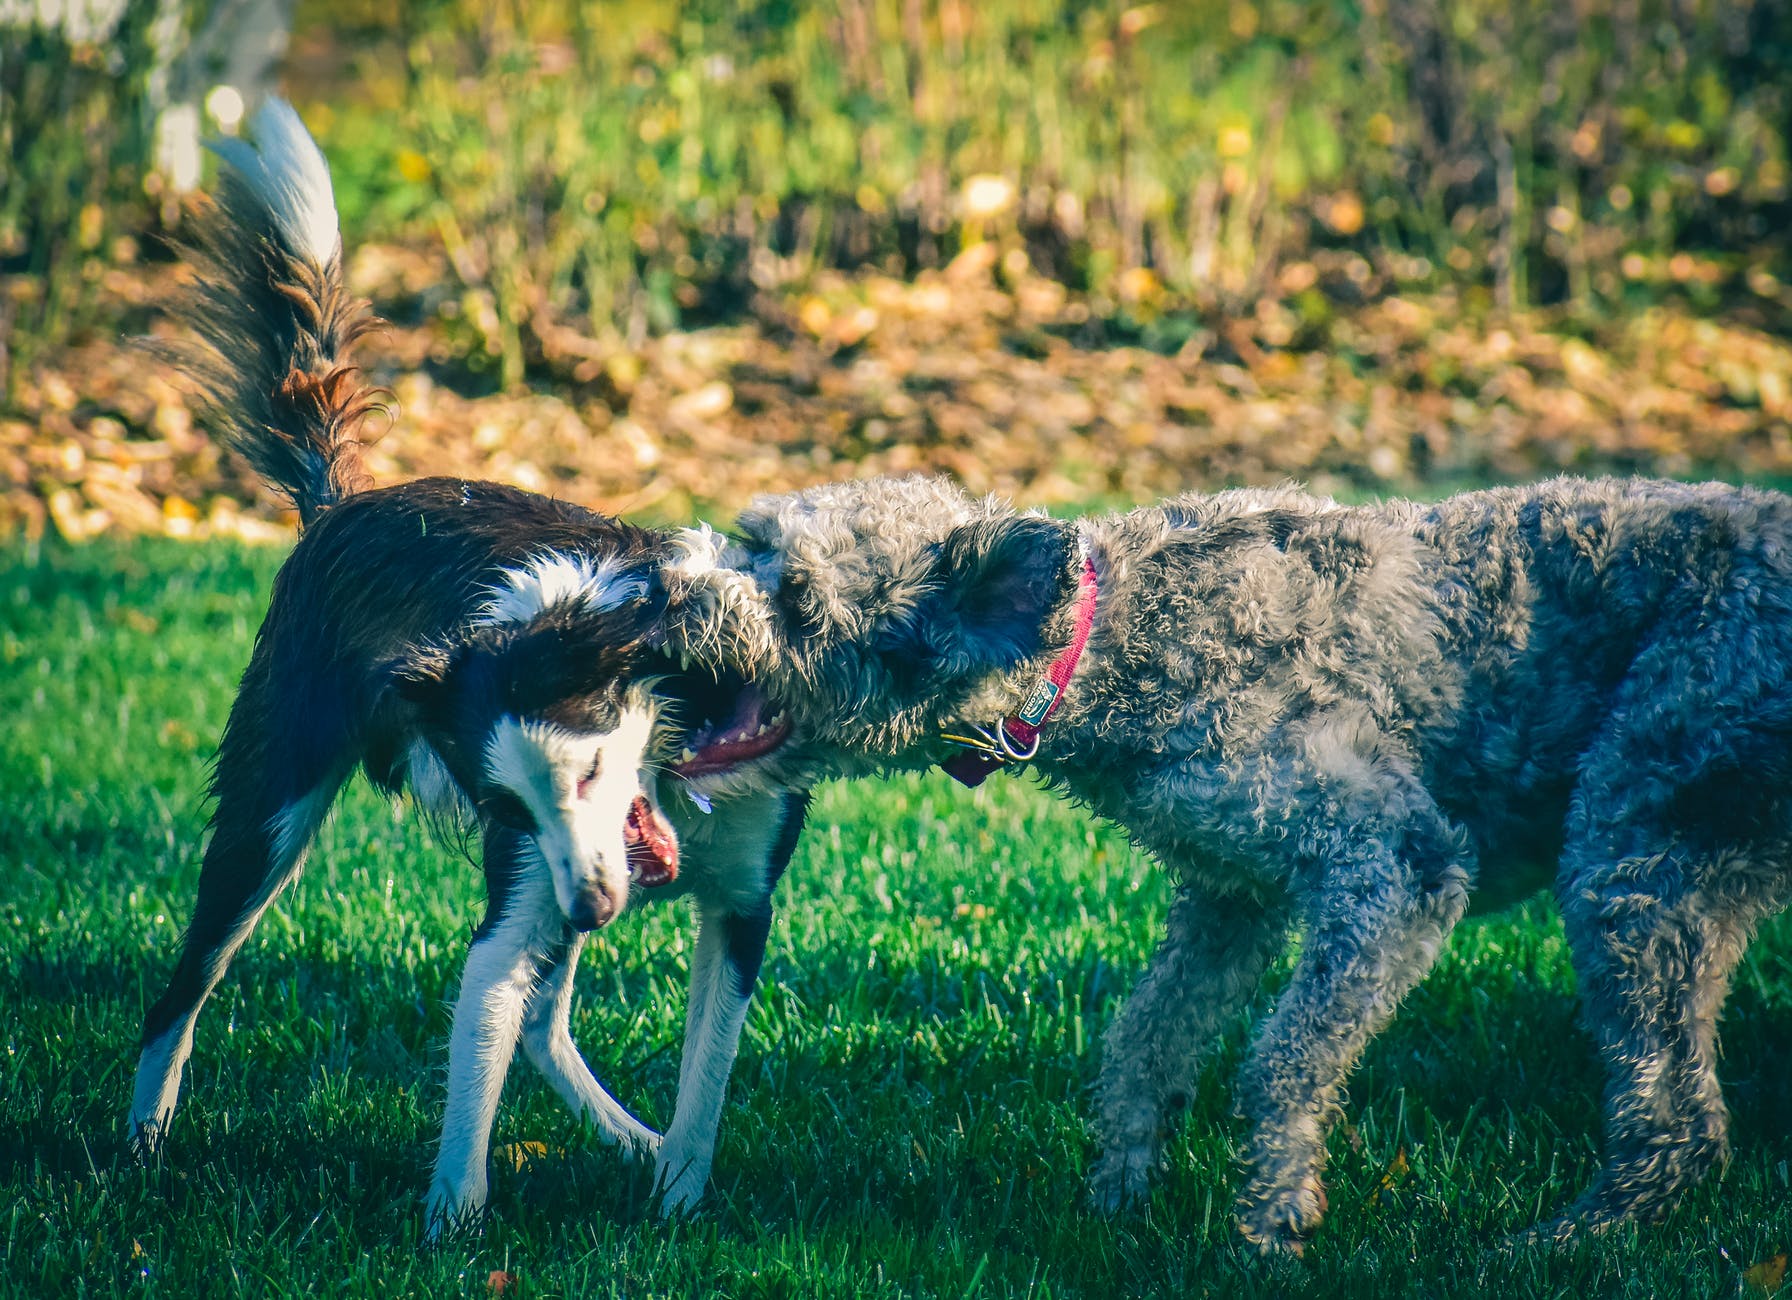 purebred dogs biting each other on grassy meadow